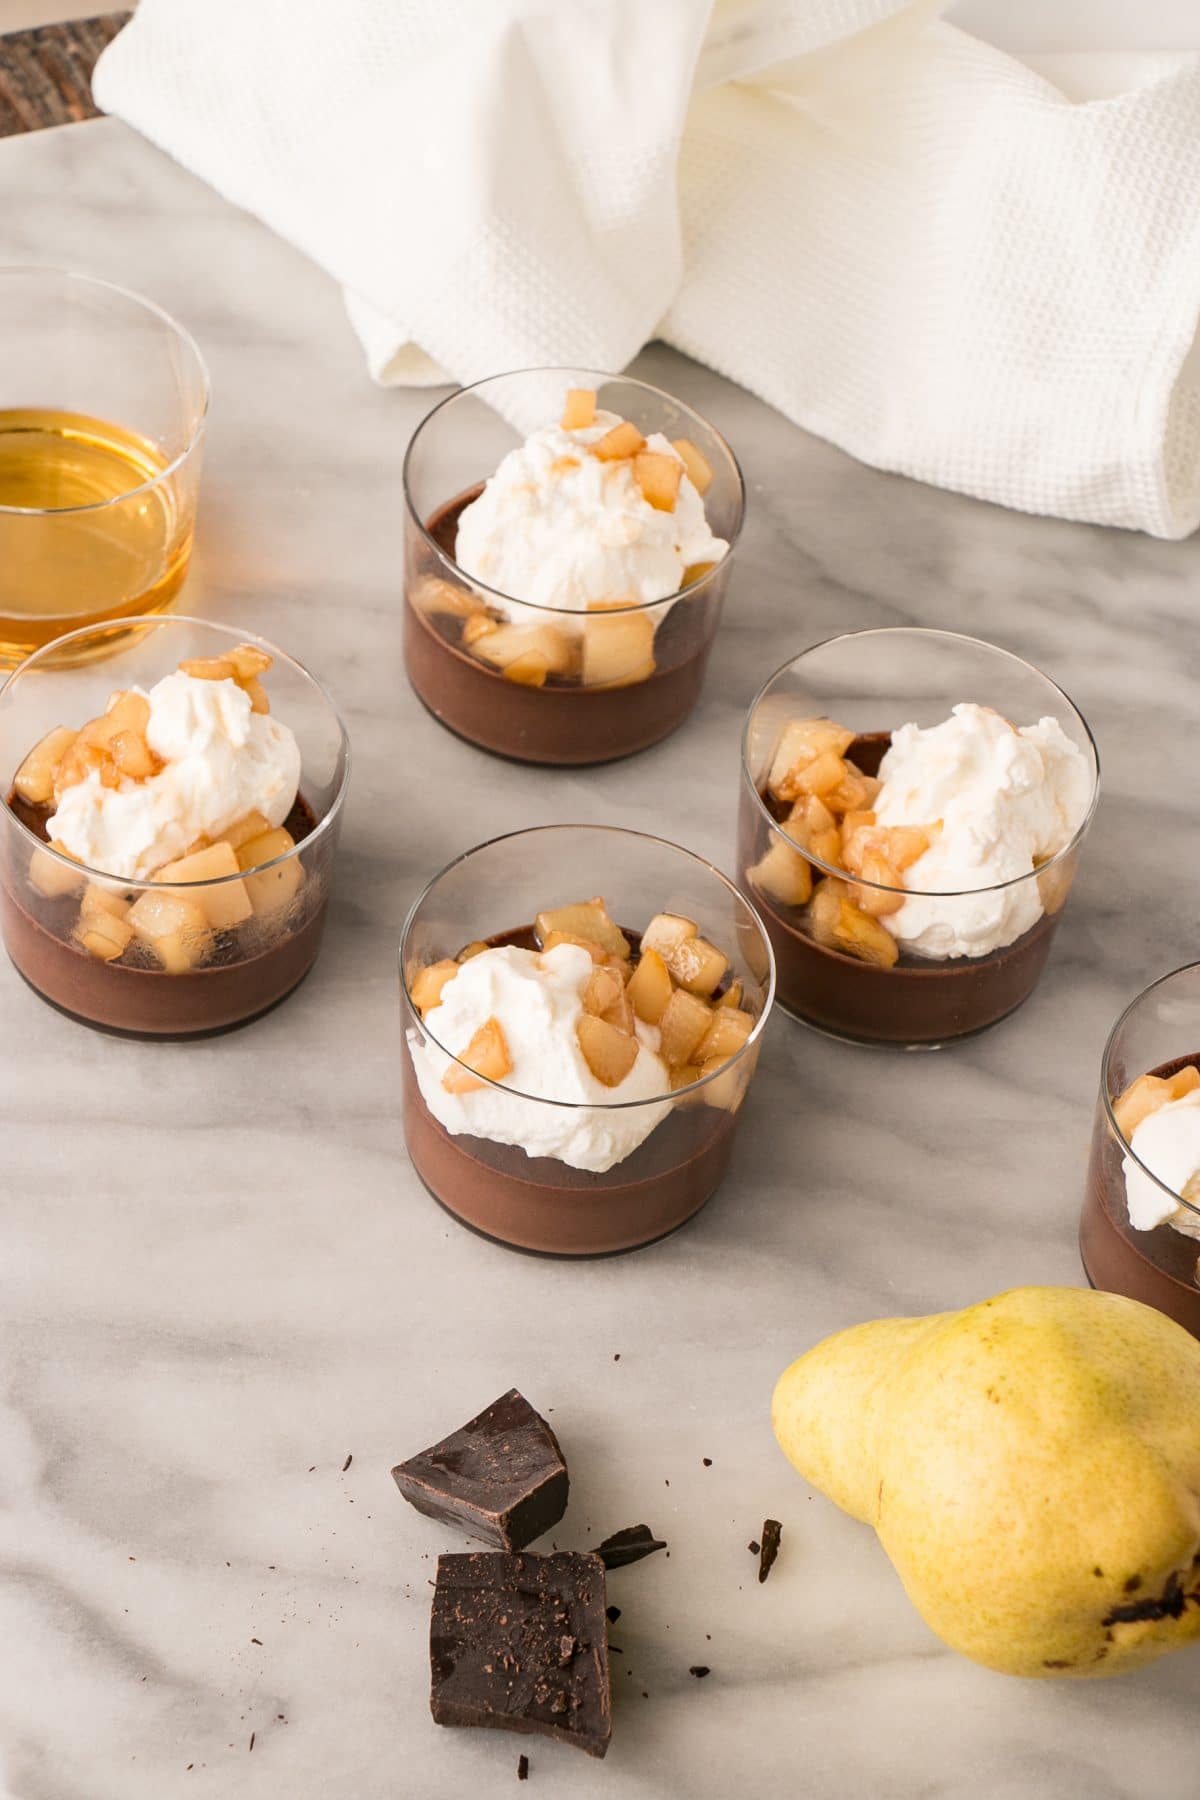 Chocolate Whiskey Pots de Creme with Caramelized Pears and Whipping Cream is an easy and decadent dessert to prepare for date night or make ahead for a showstopper of a dinner party dessert. #datenight #chocolate #dessert